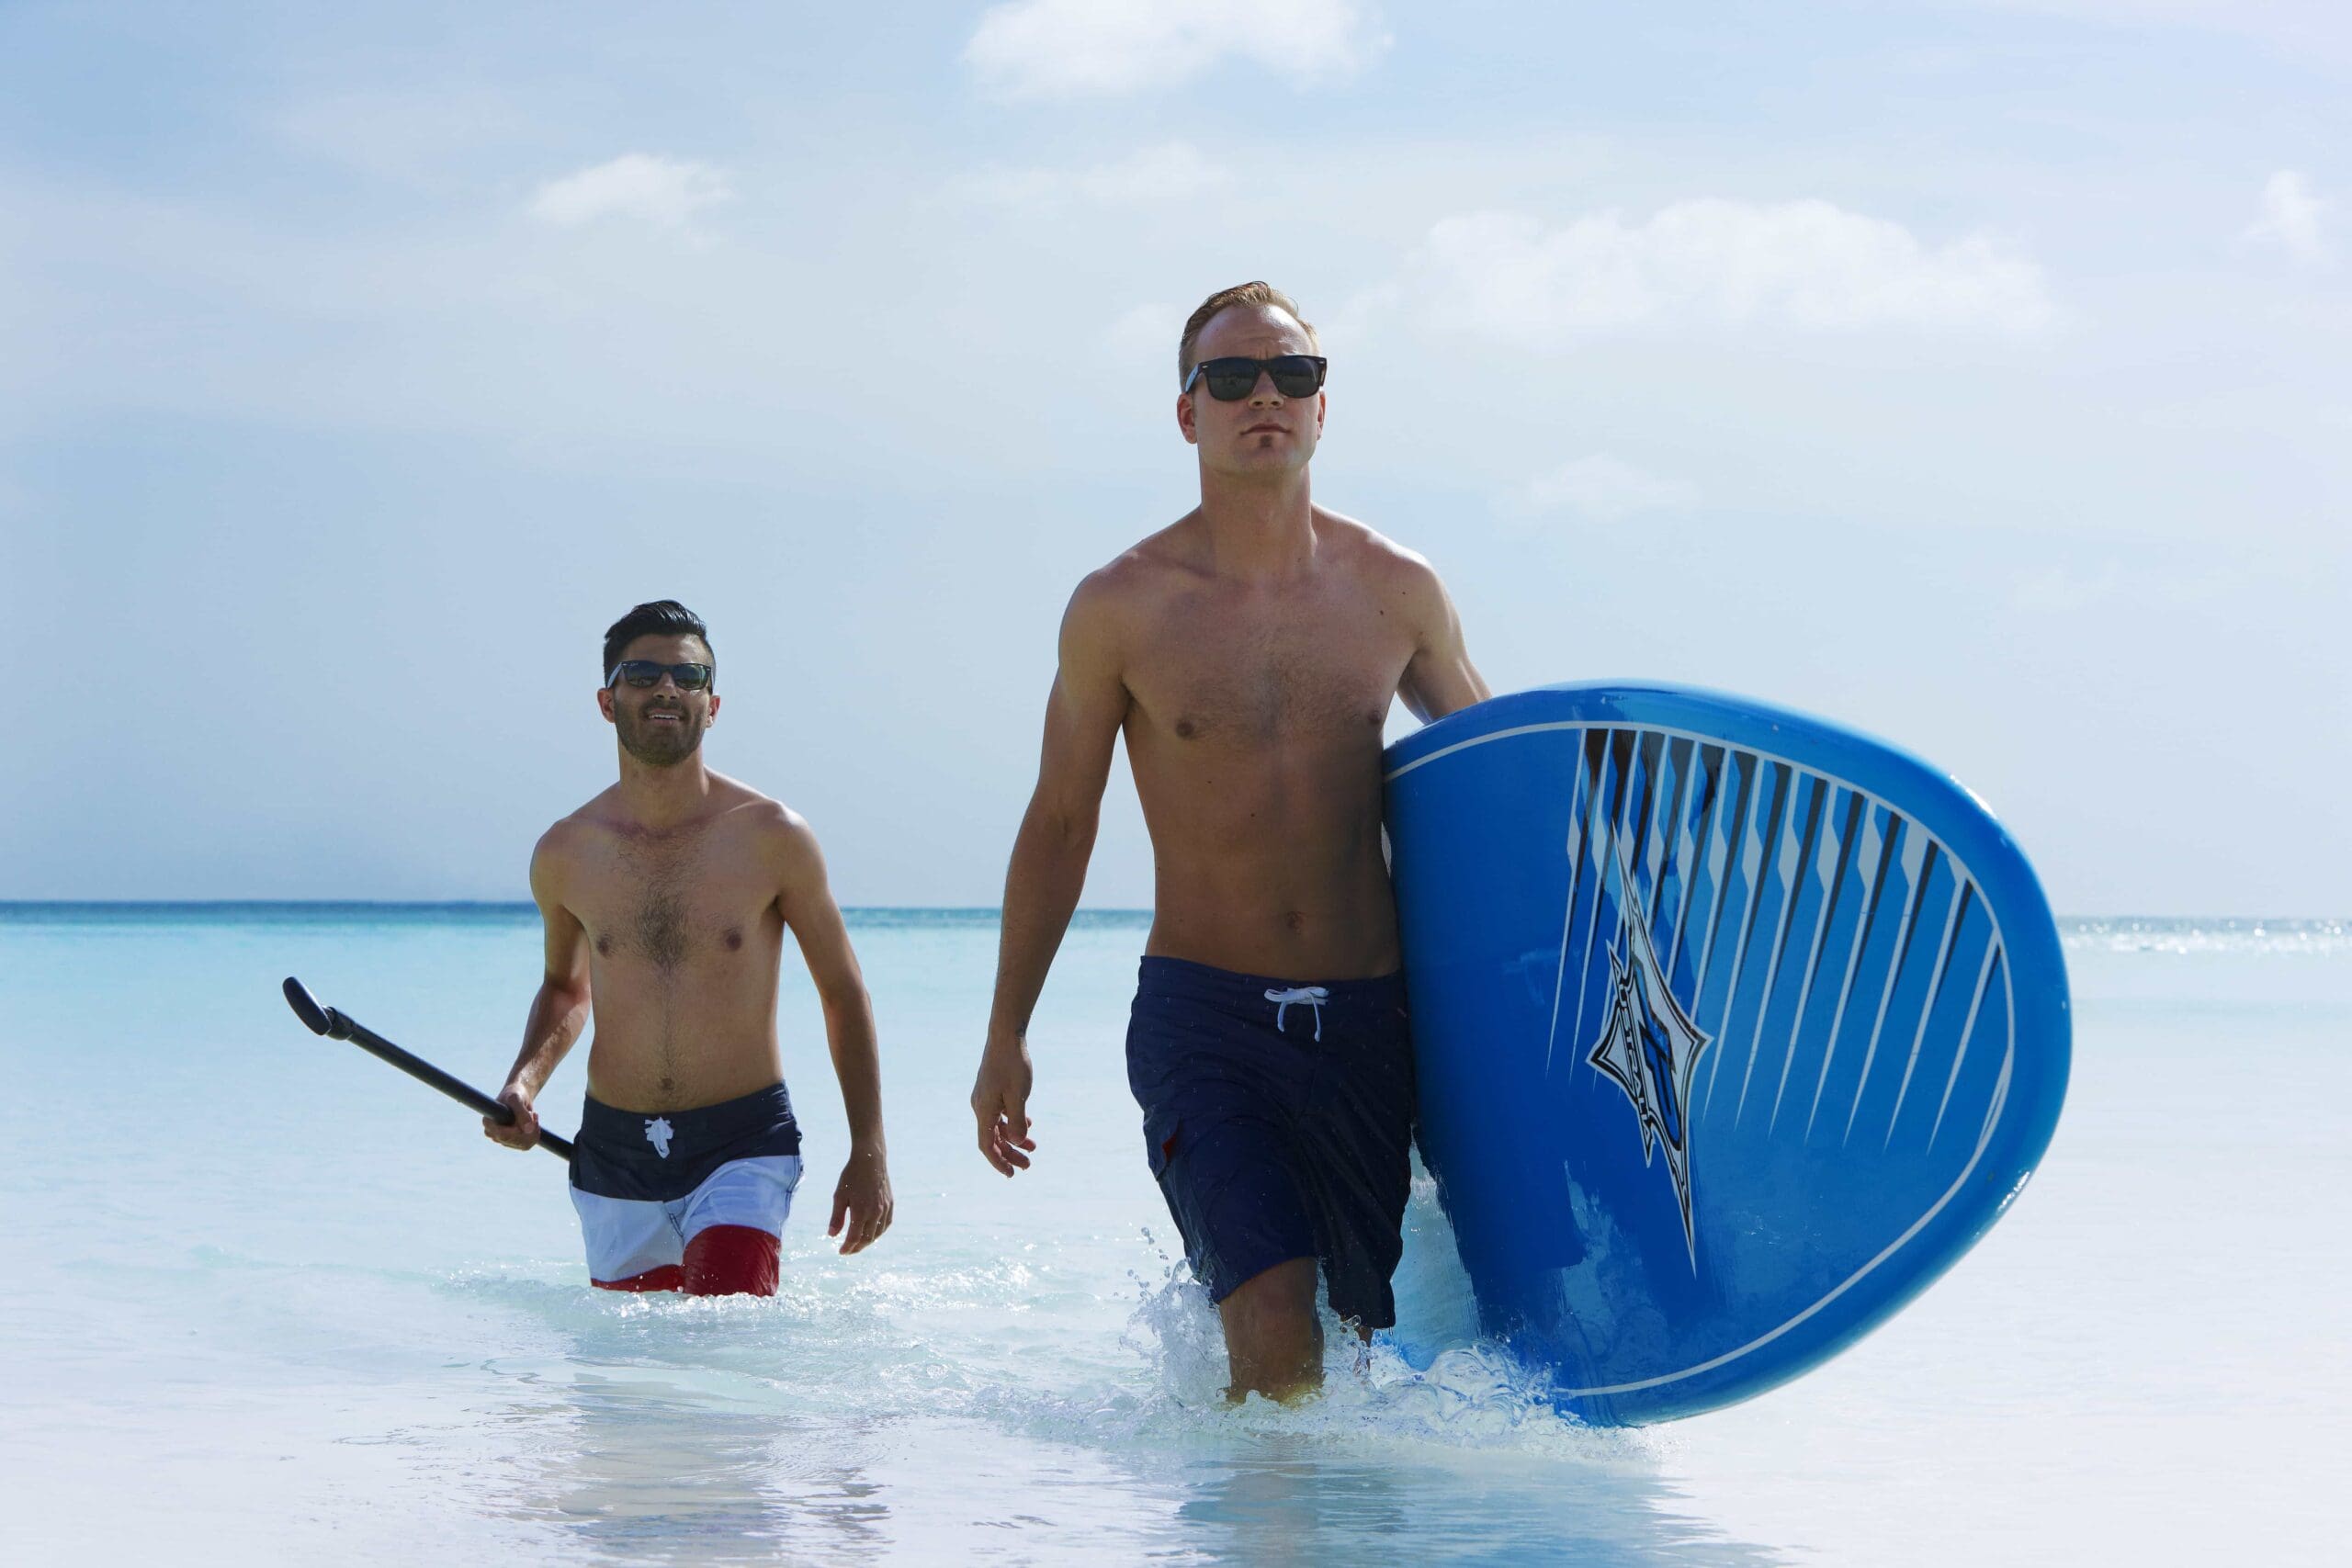 Aruba Marriott Resort  Men Paddle Boarding - 30+ Unique Gifts For Men: Holiday Gift Guide